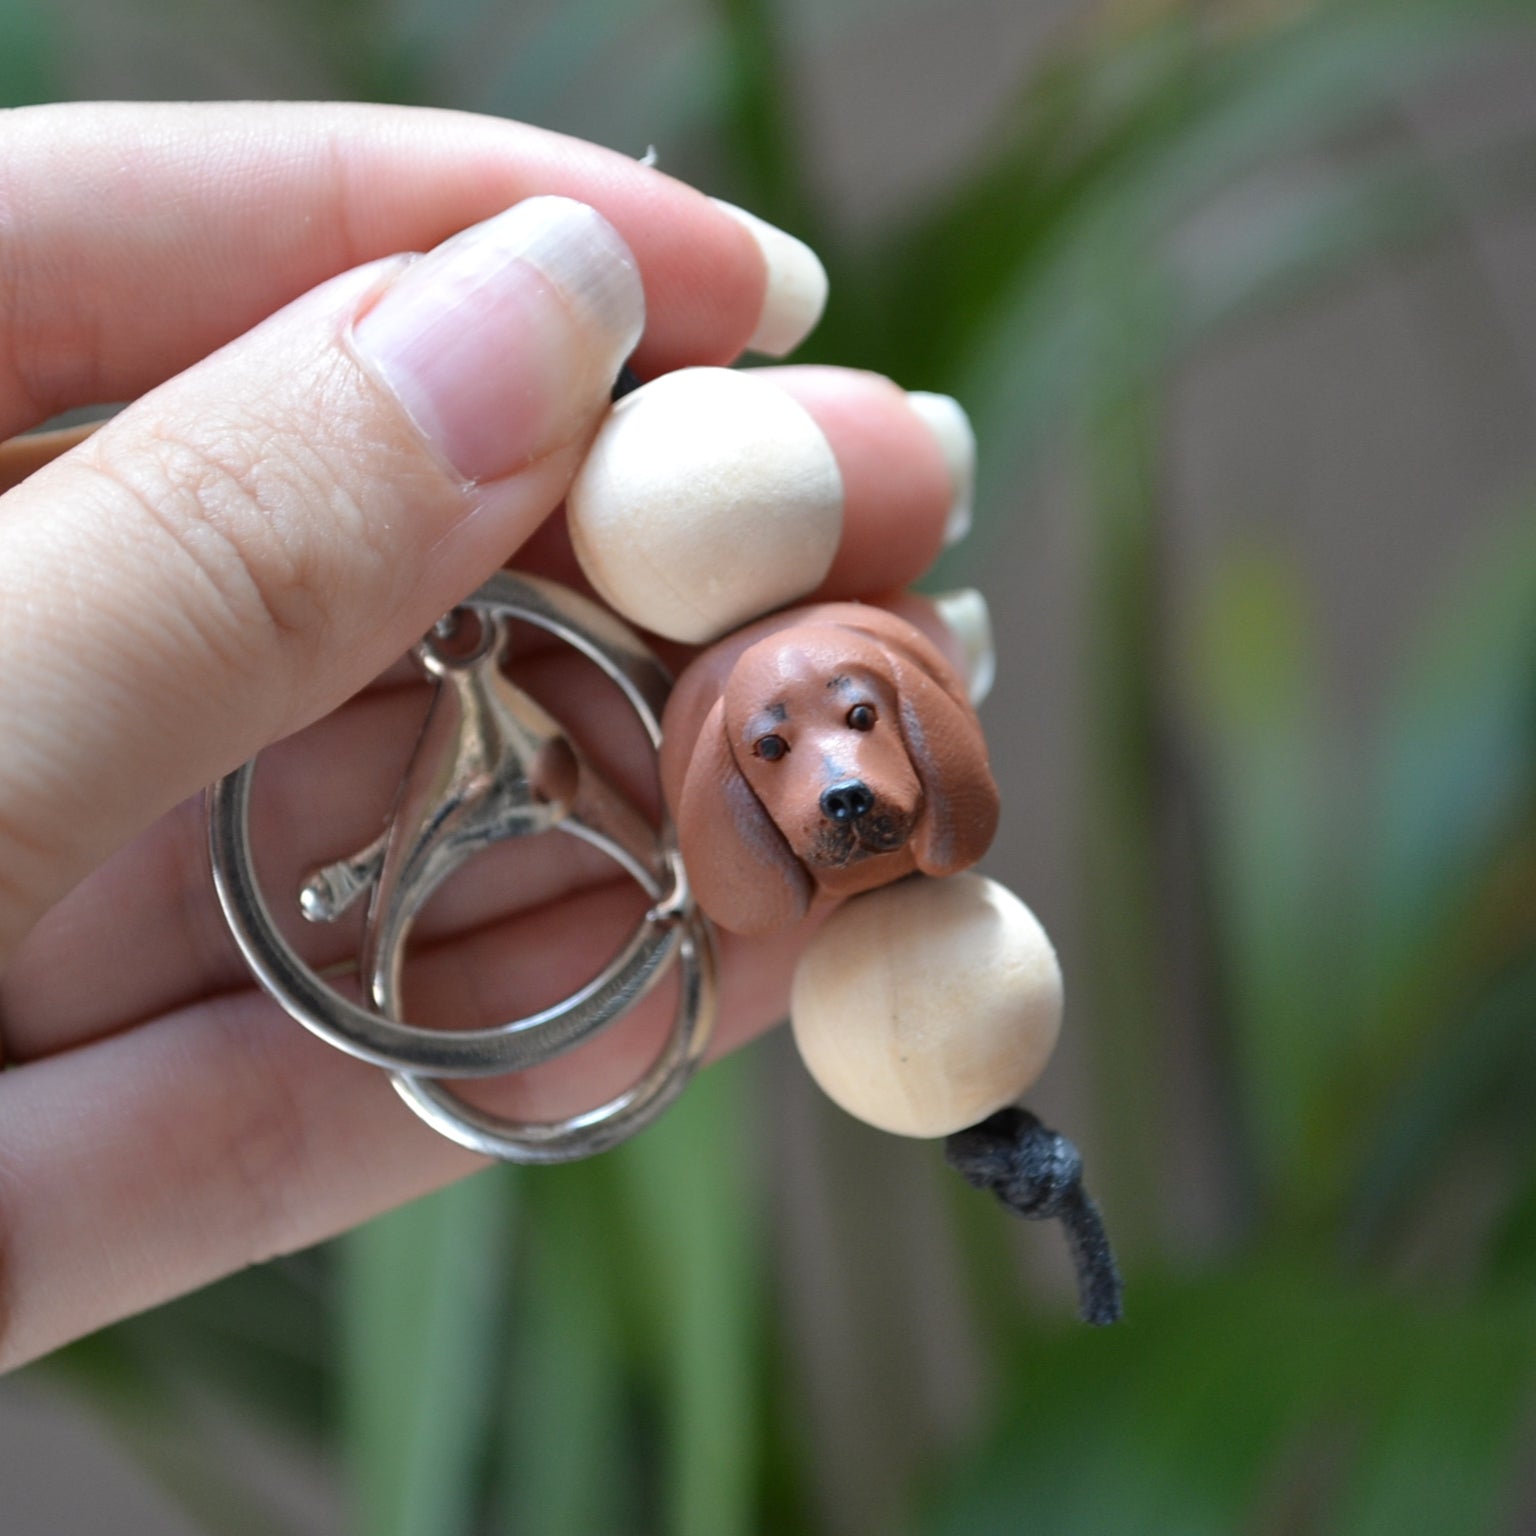 Handmade timber and polymer clay dachshund dog keychain being held in front of green palm plant background